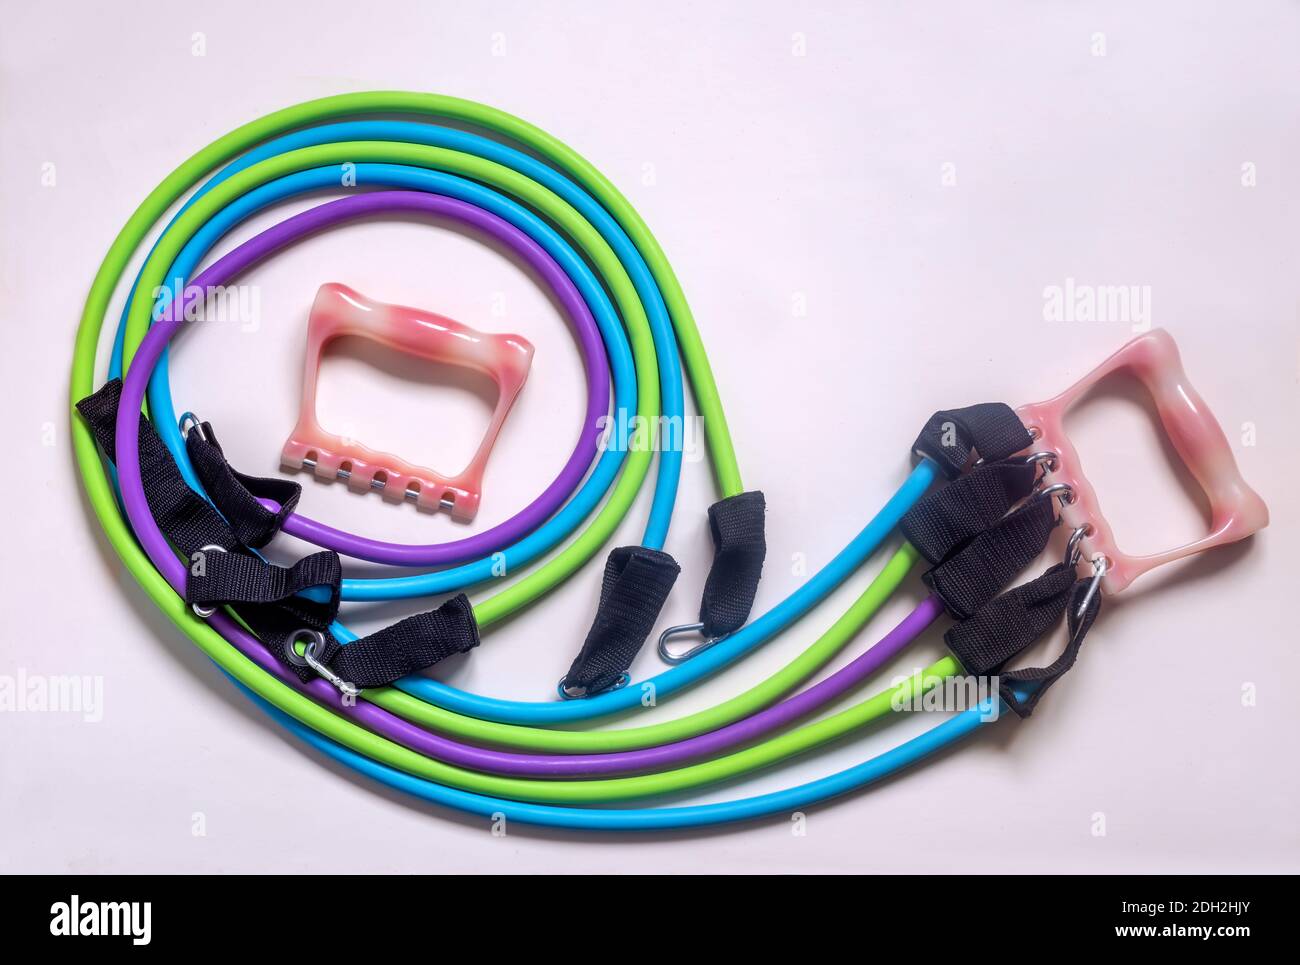 Universal sports expander for fitness, healthy lifestyle concept. Stock Photo